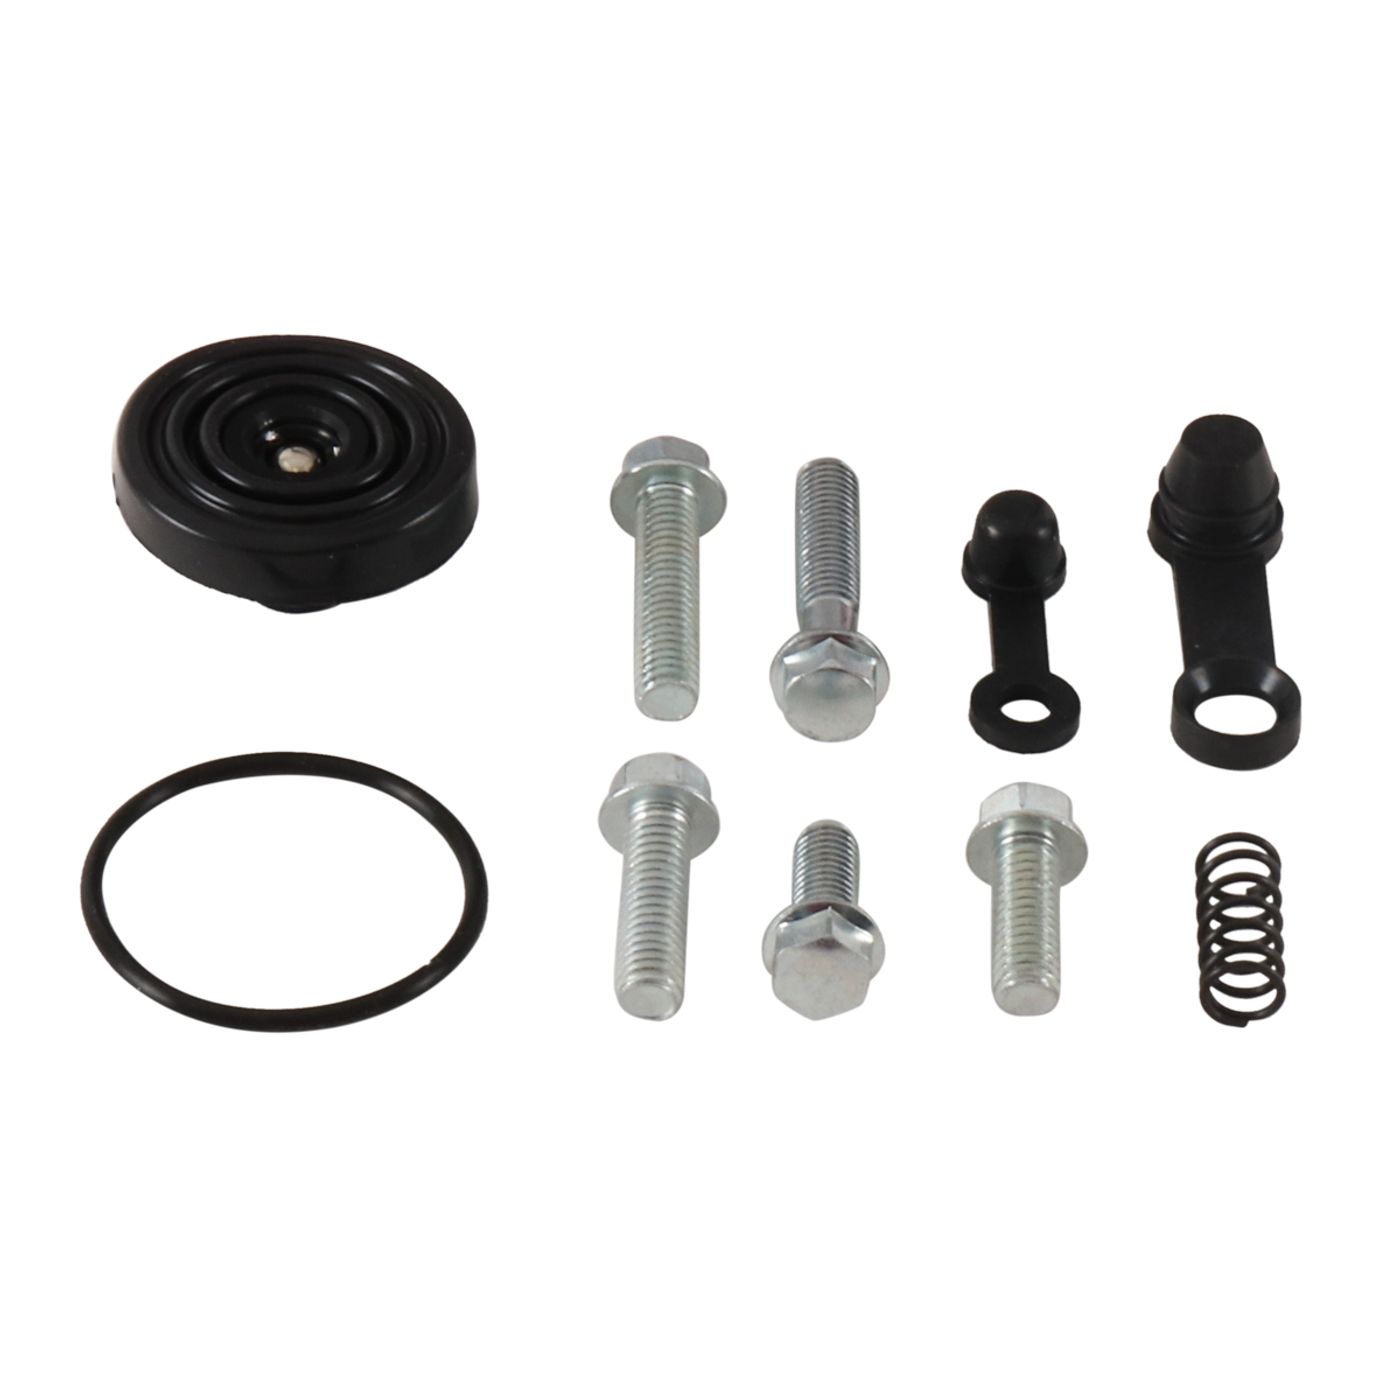 Wrp Clutch Slave Cylinder Kits - WRP186013 image